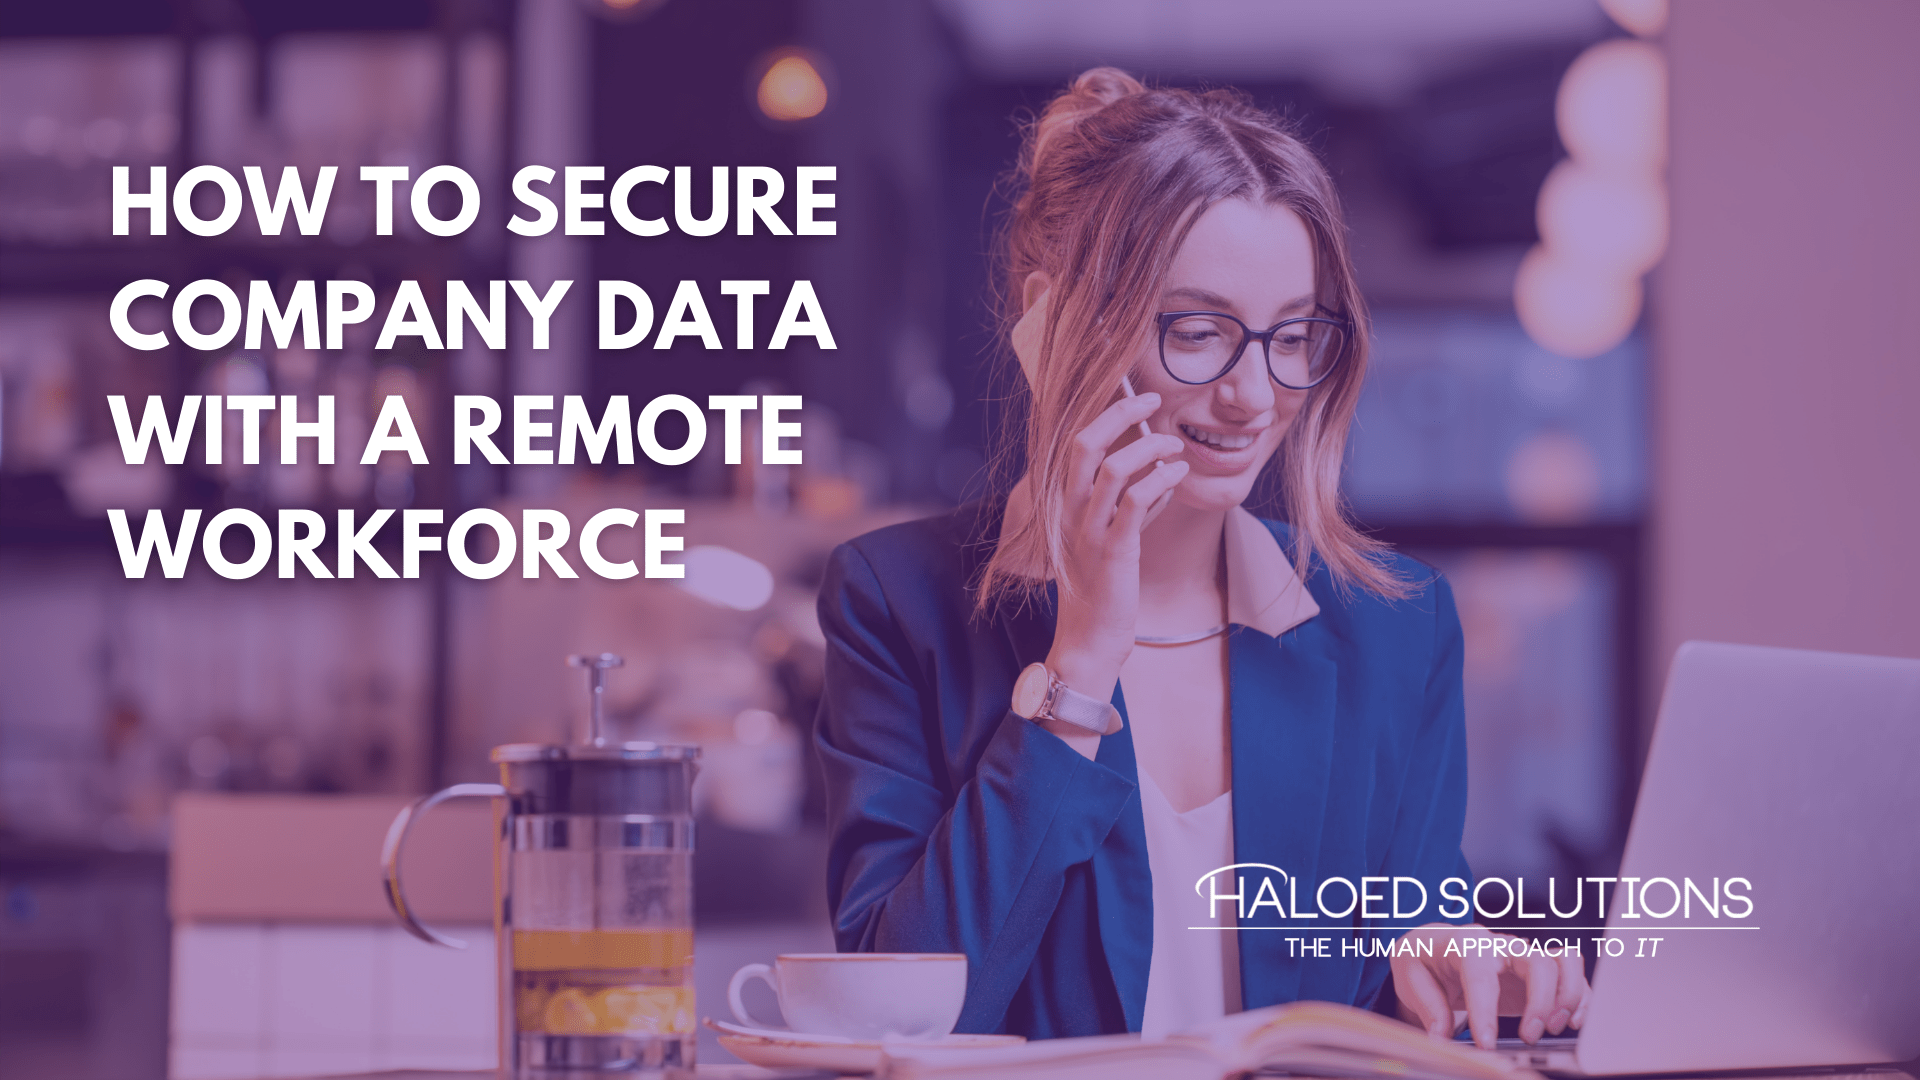 How To Secure Company Data With a Remote Workforce